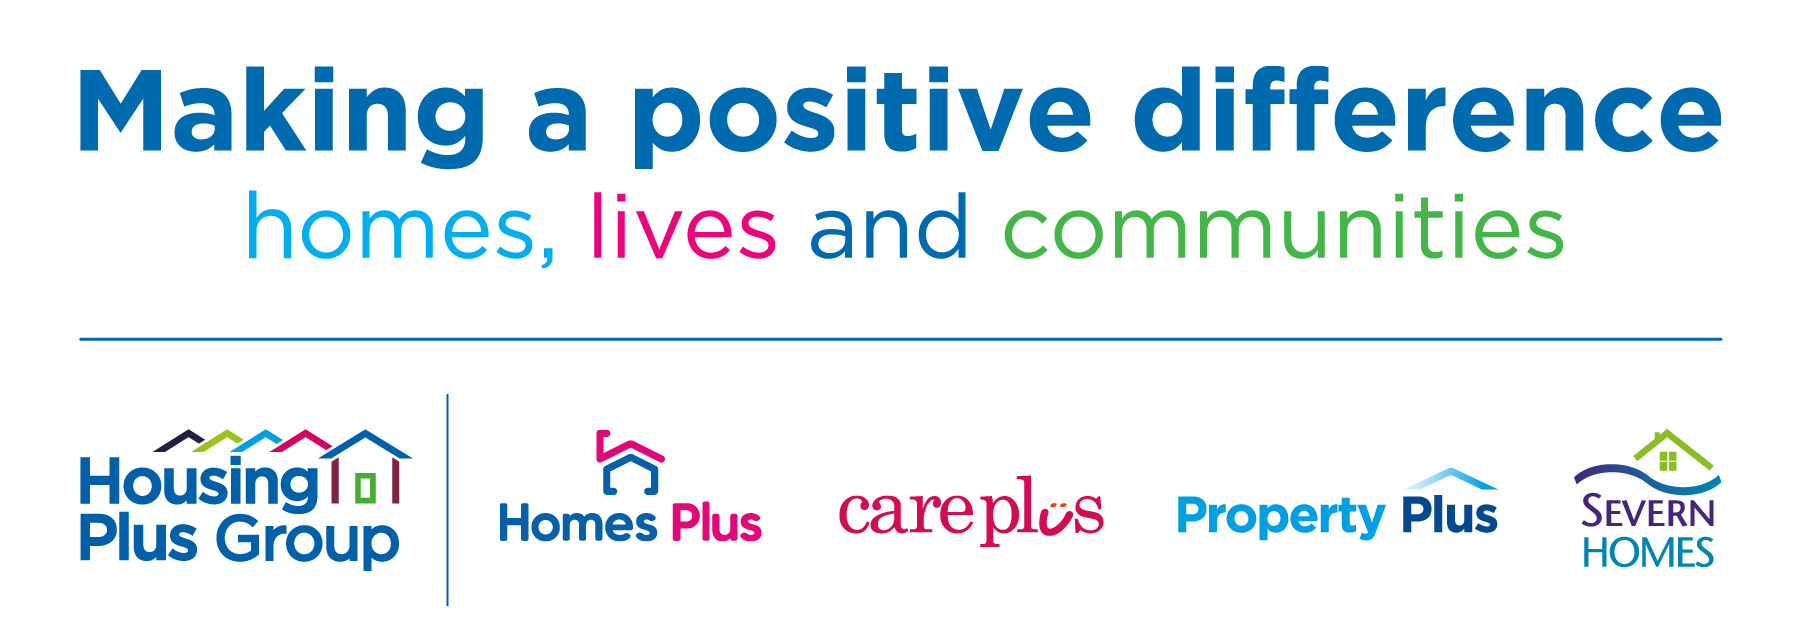 Housing Plus Group vision - Making a positive difference, homes, lives and communities. Plus Housing Plus Group logo with Homes Plus, Care Plus, Property Plus and Severn Homes logos